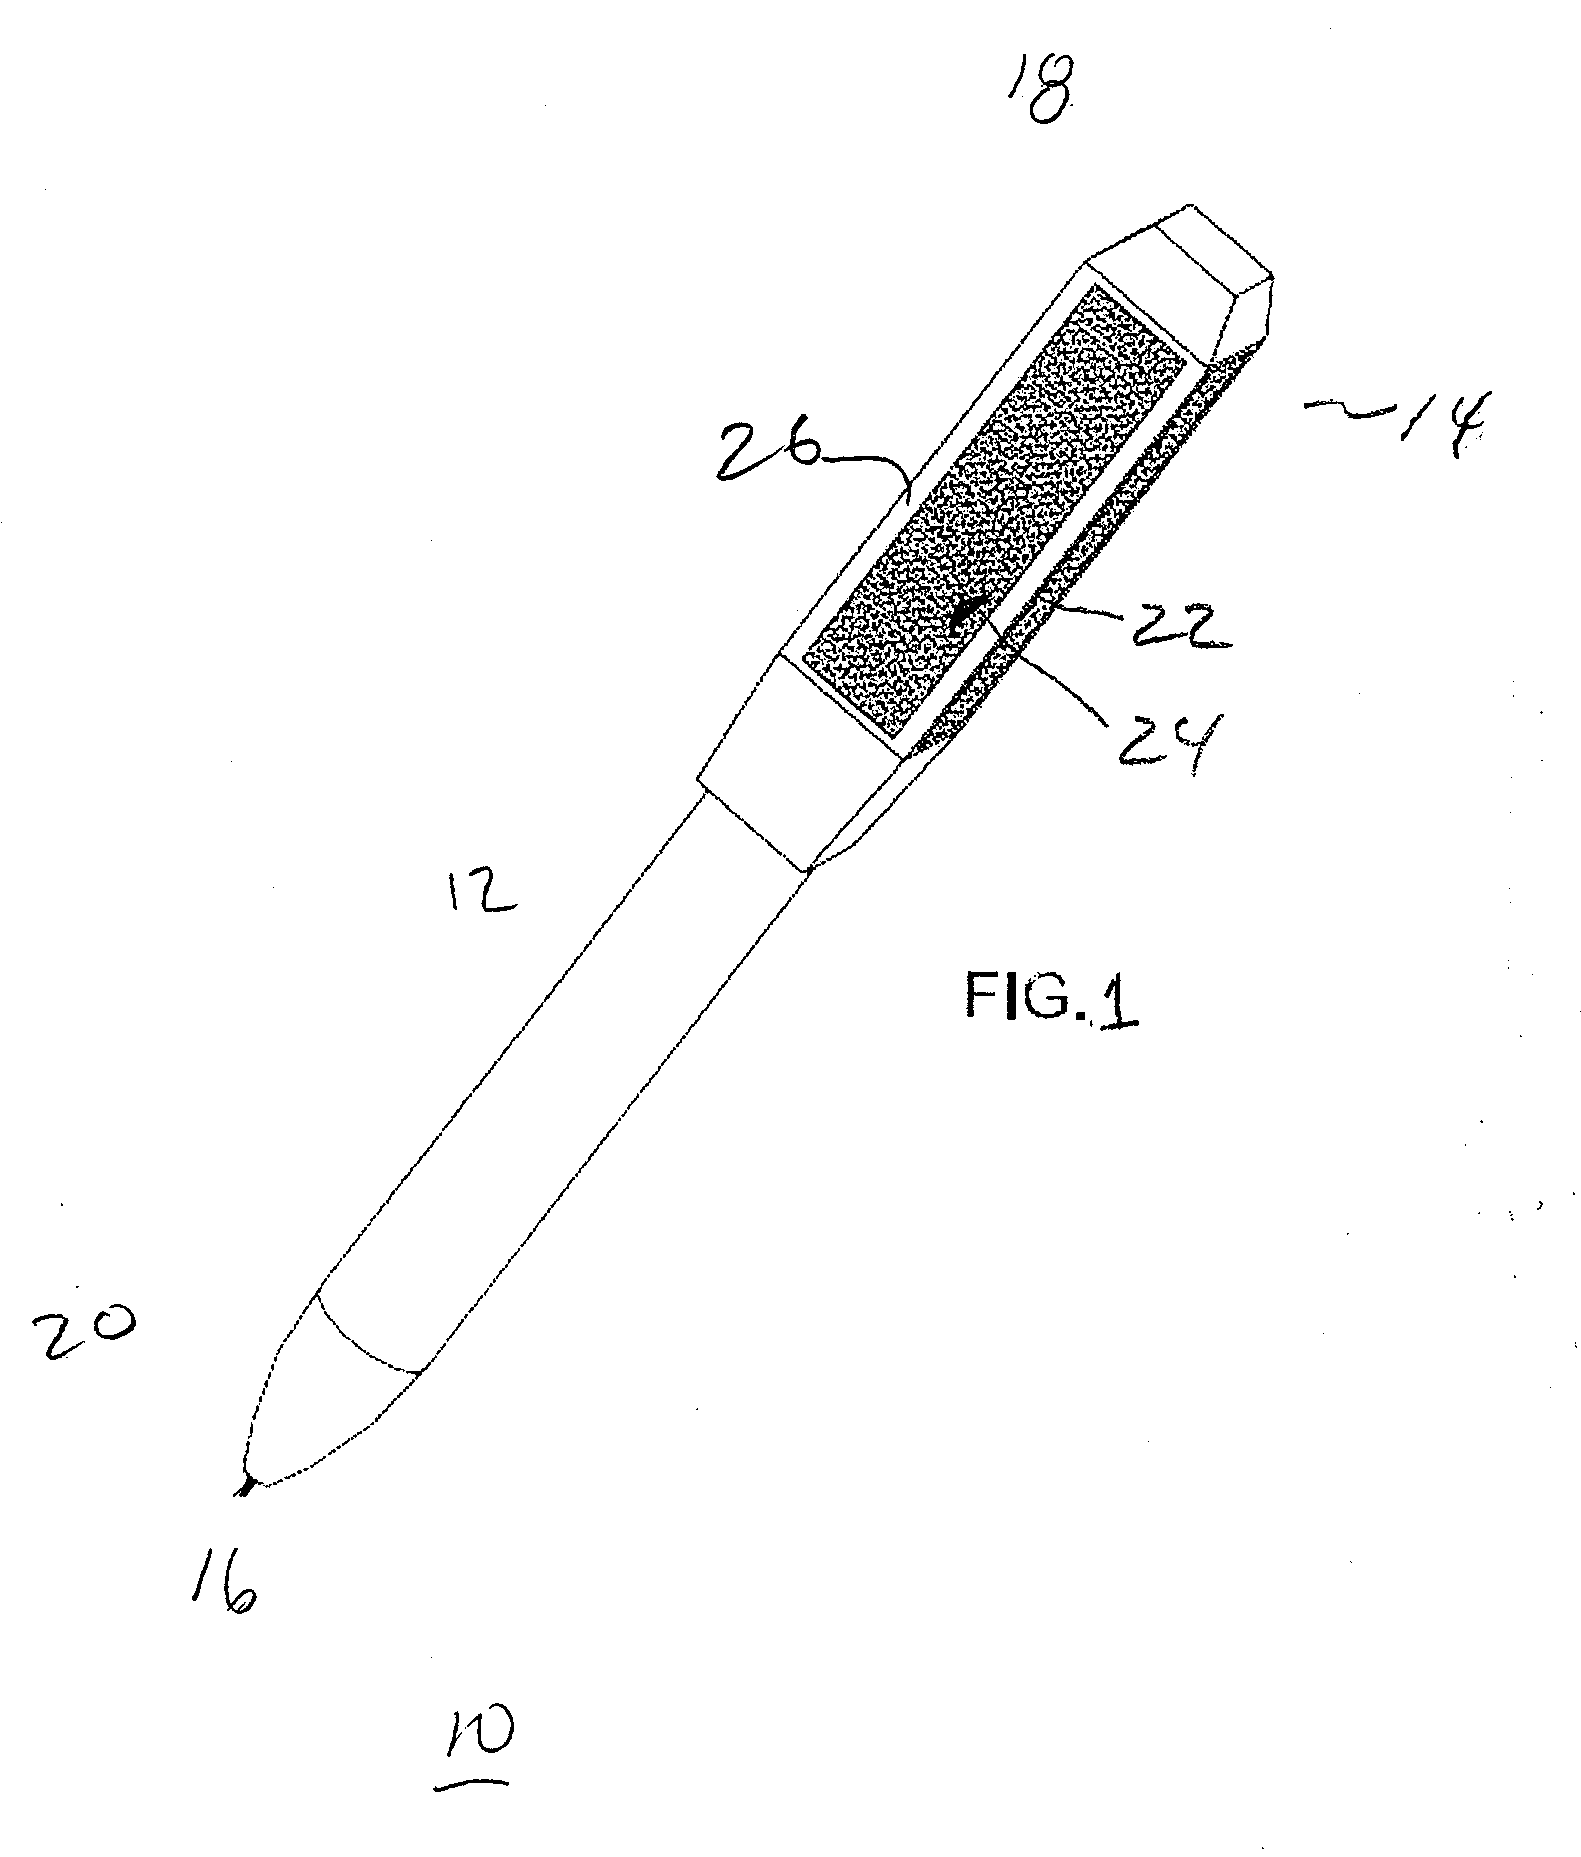 Writing instrument fitted with a filing sleeve, which acts as a plunging mechanism and has an abrasive surface to be used for nail filing